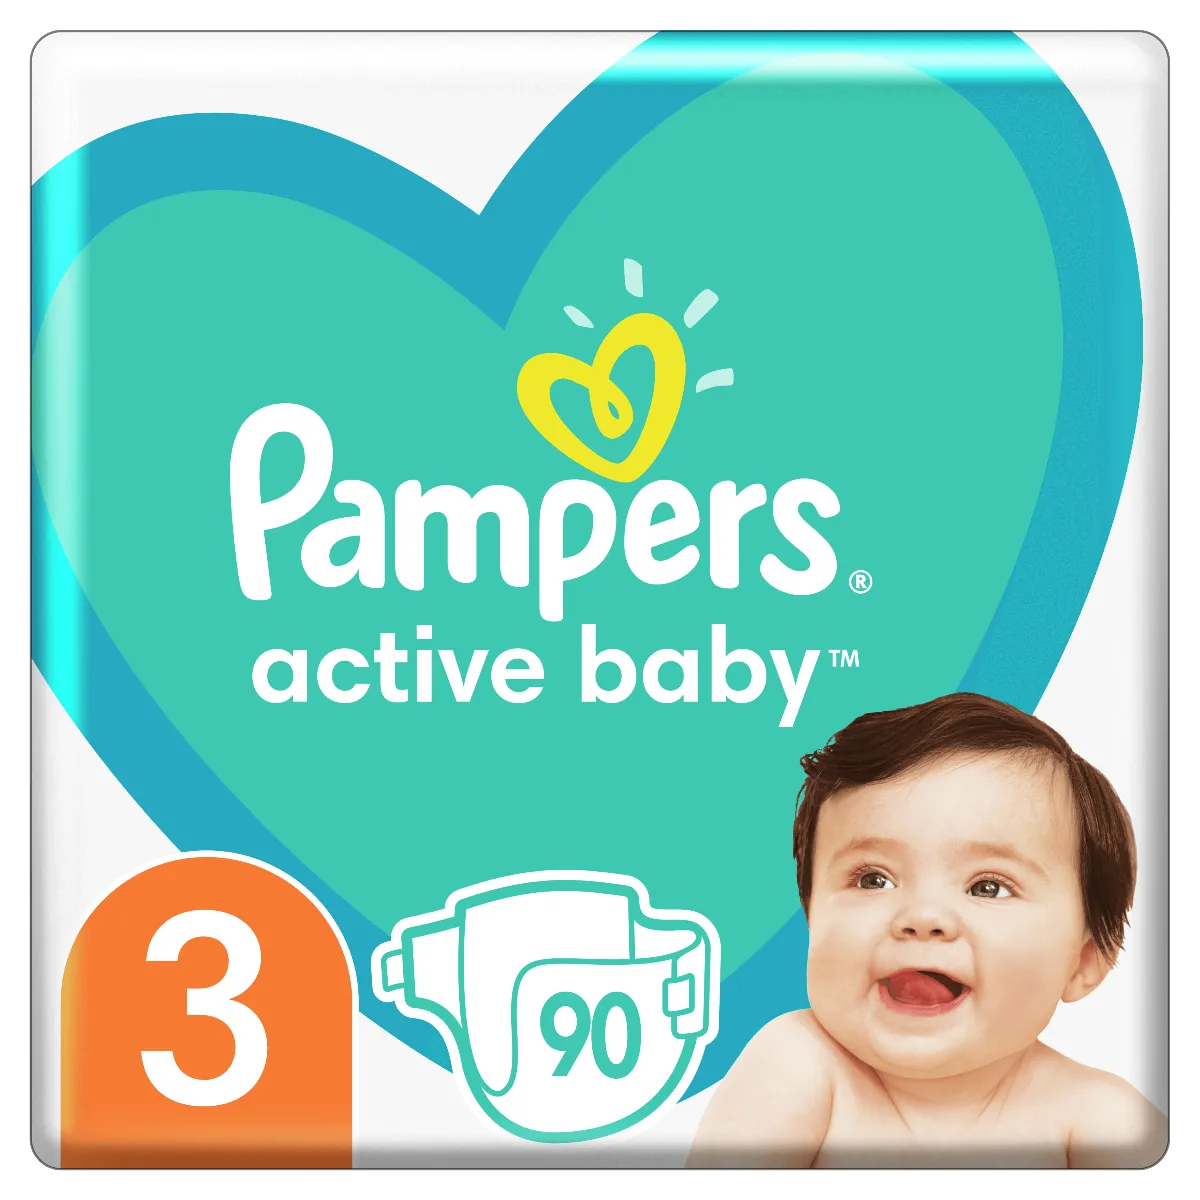 pampers baby active 7 112 szt